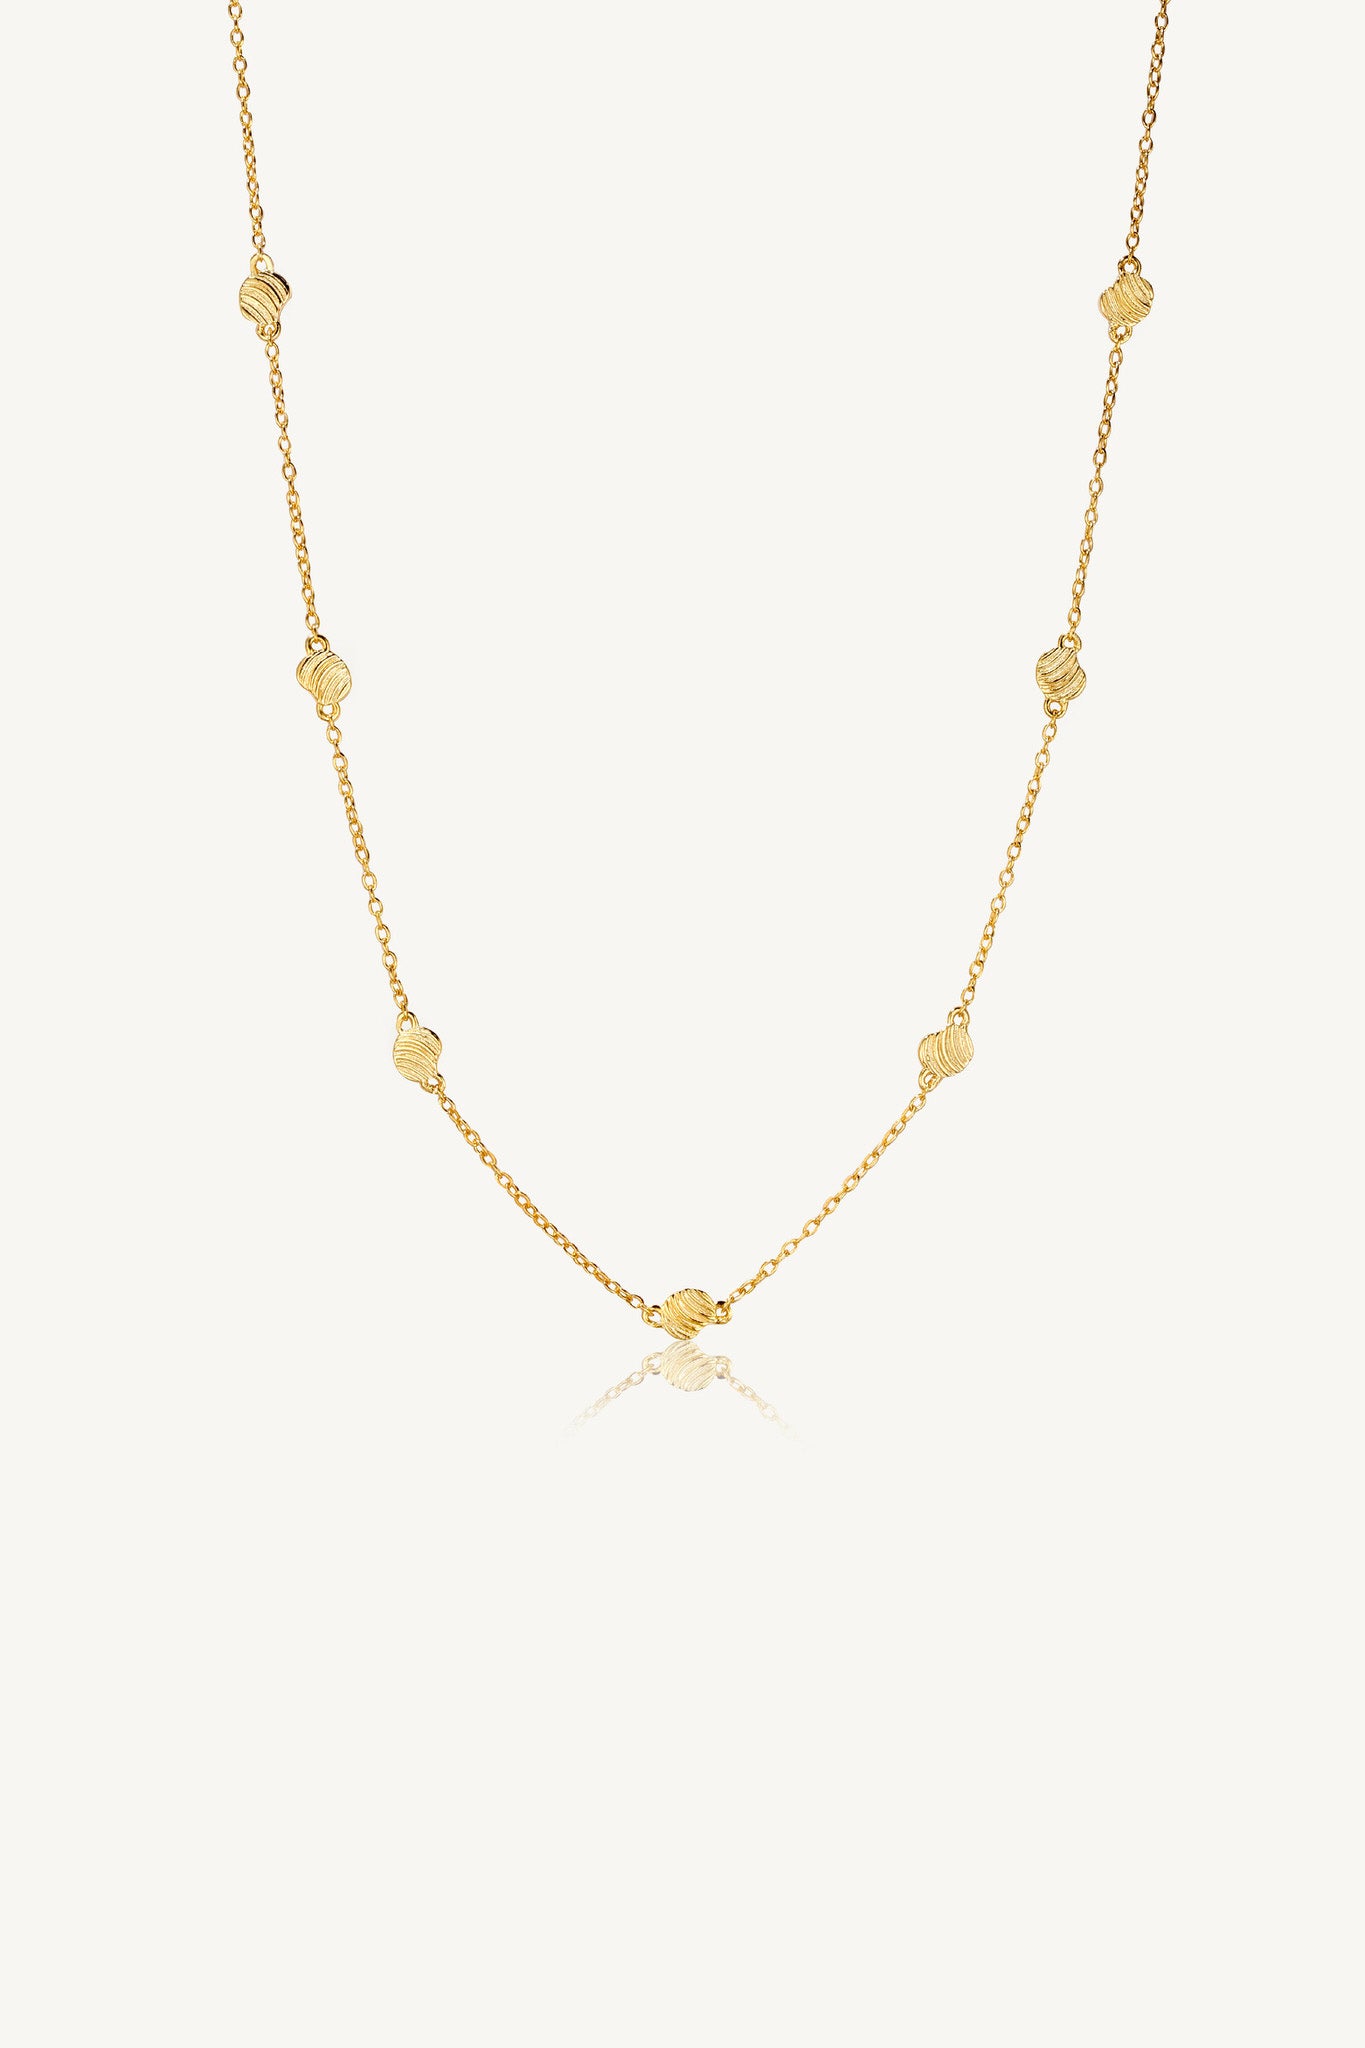 Engraved Shell Lines Chain Necklace Gold Vermeil 